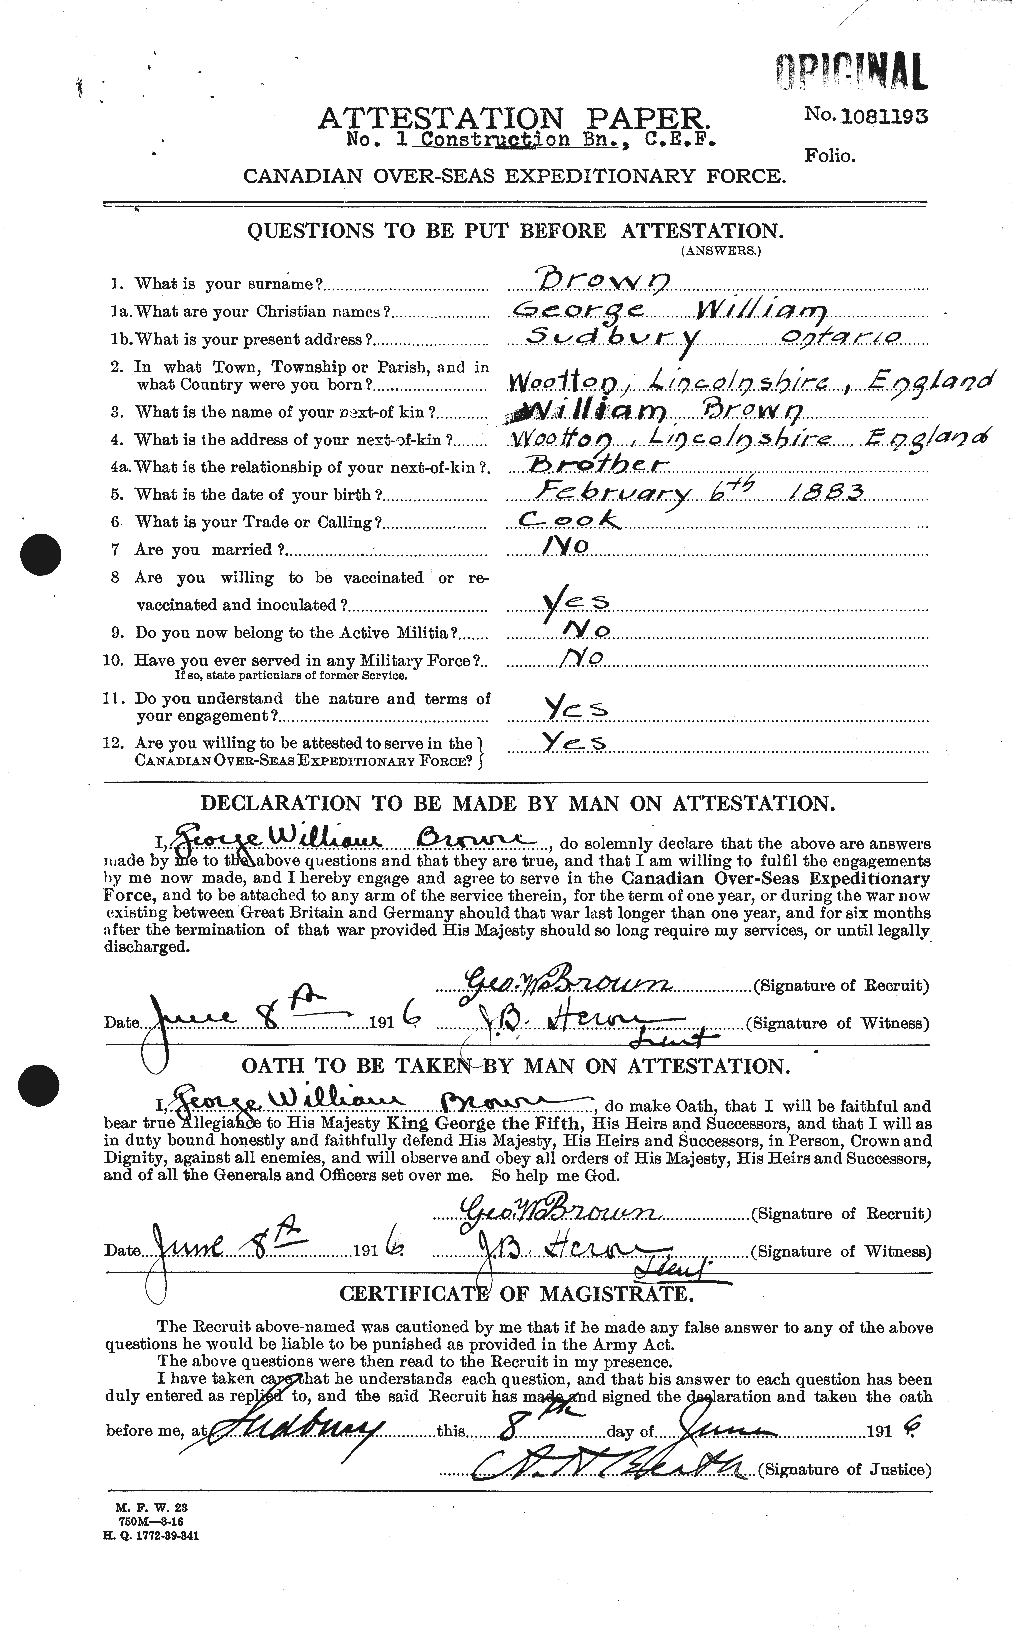 Personnel Records of the First World War - CEF 262597a